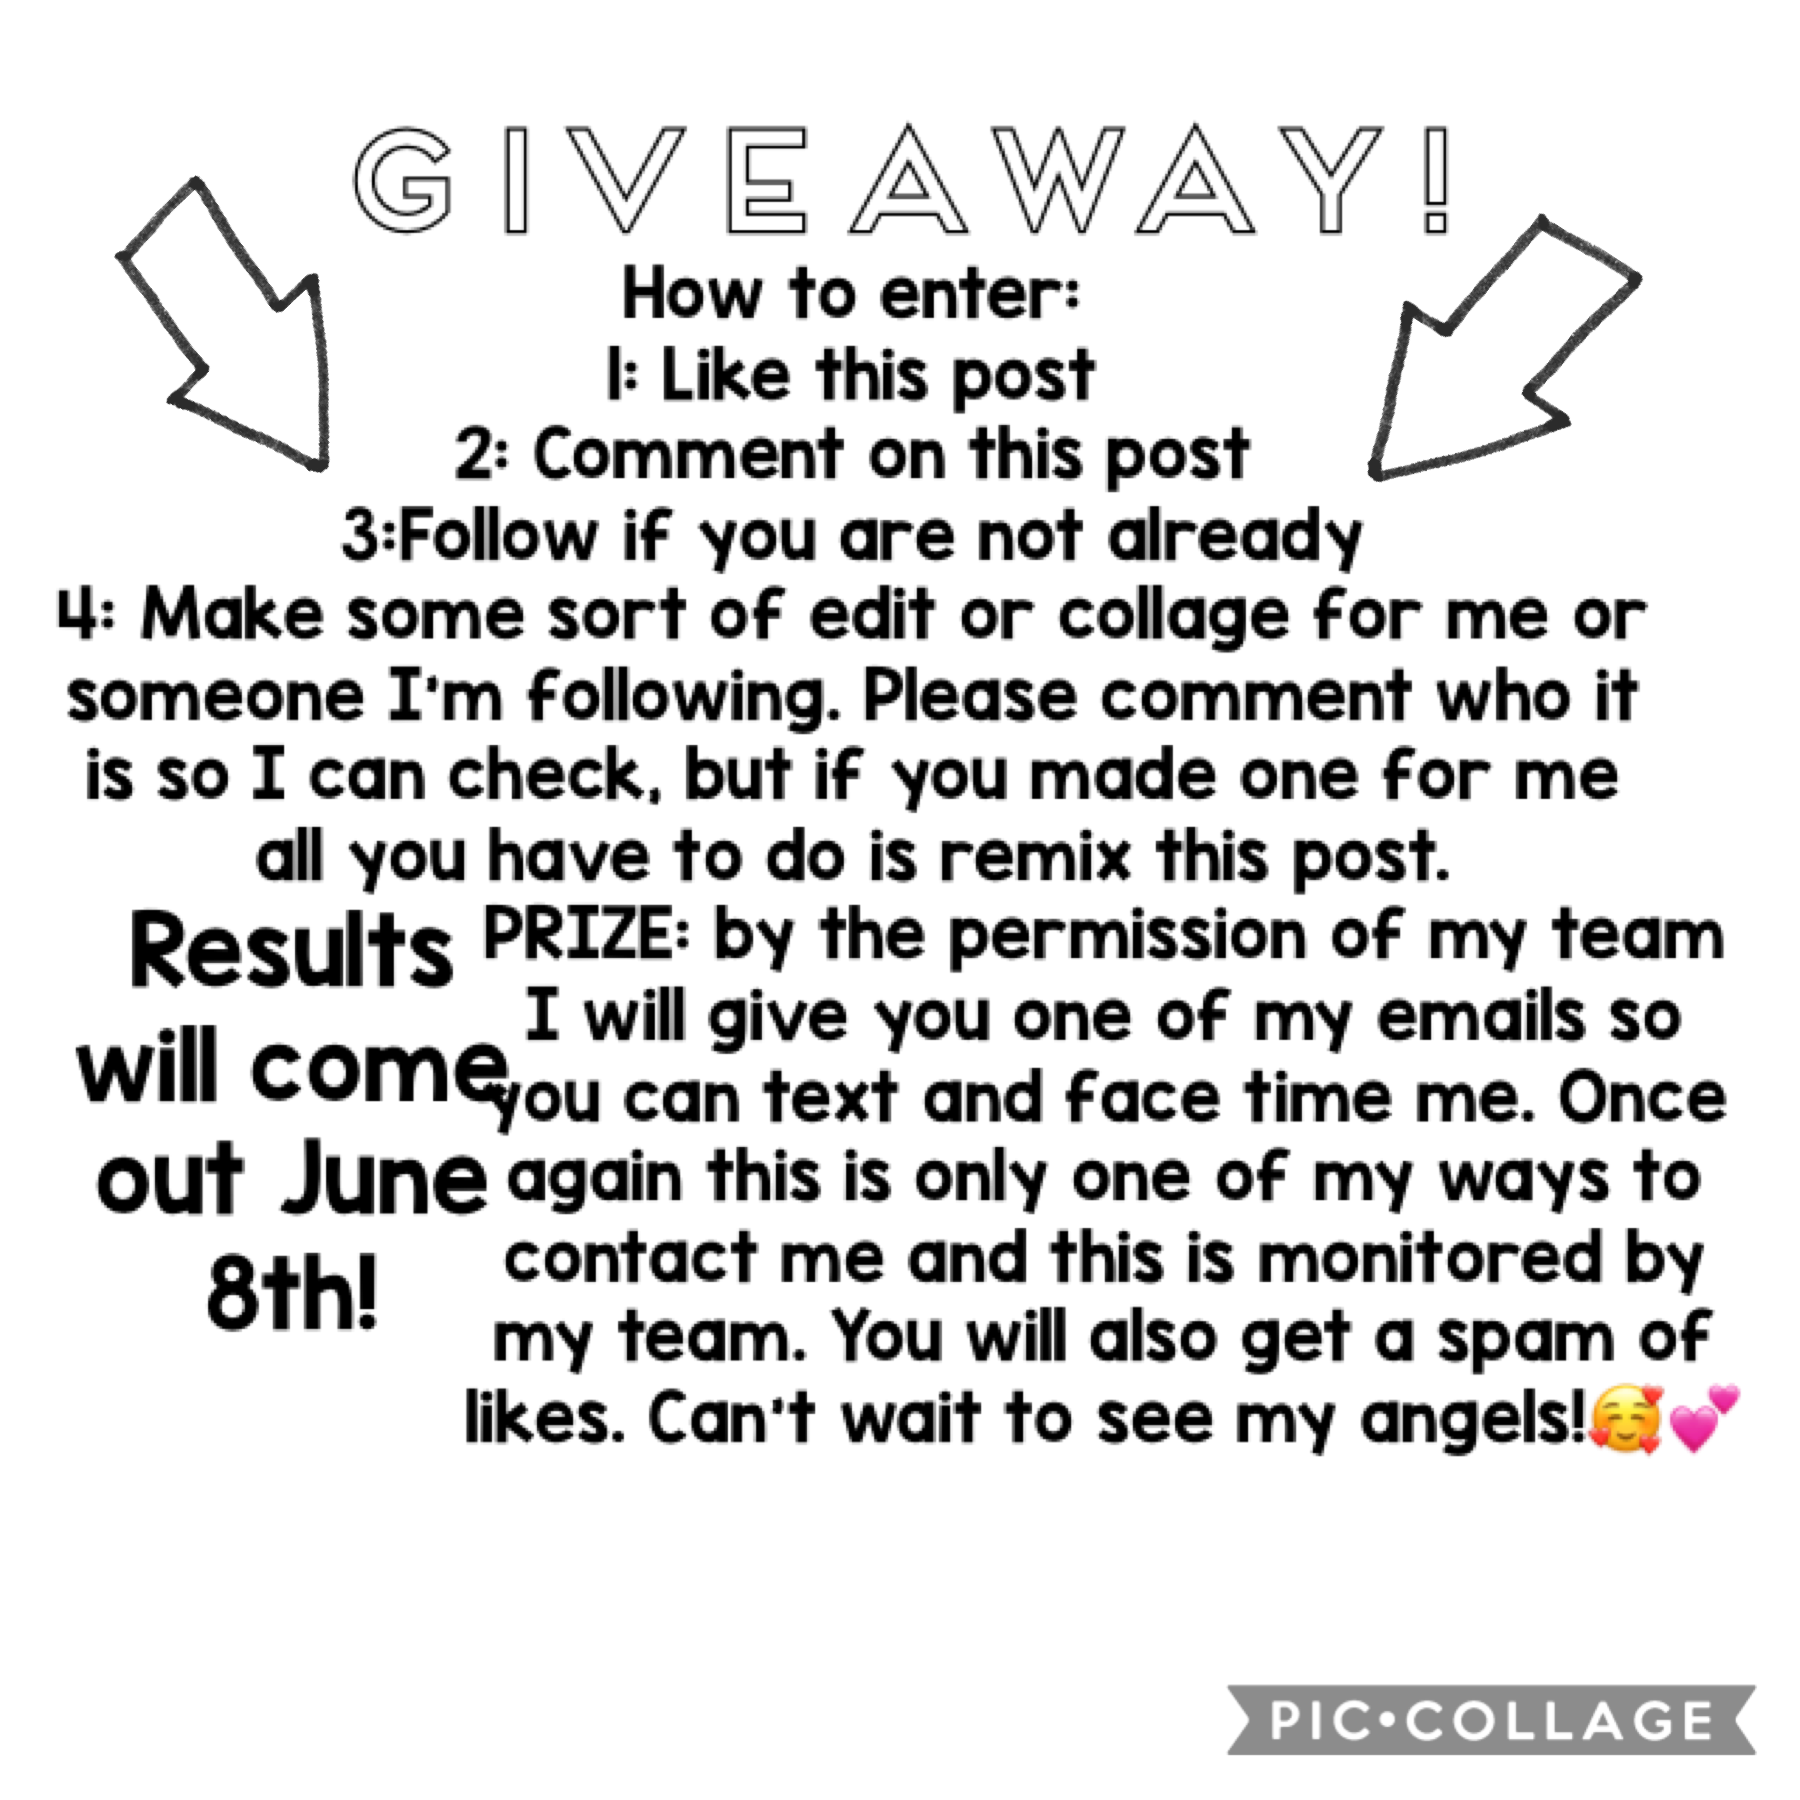 Please read everything if you would like to enter. Can’t wait to see you angels enter💗